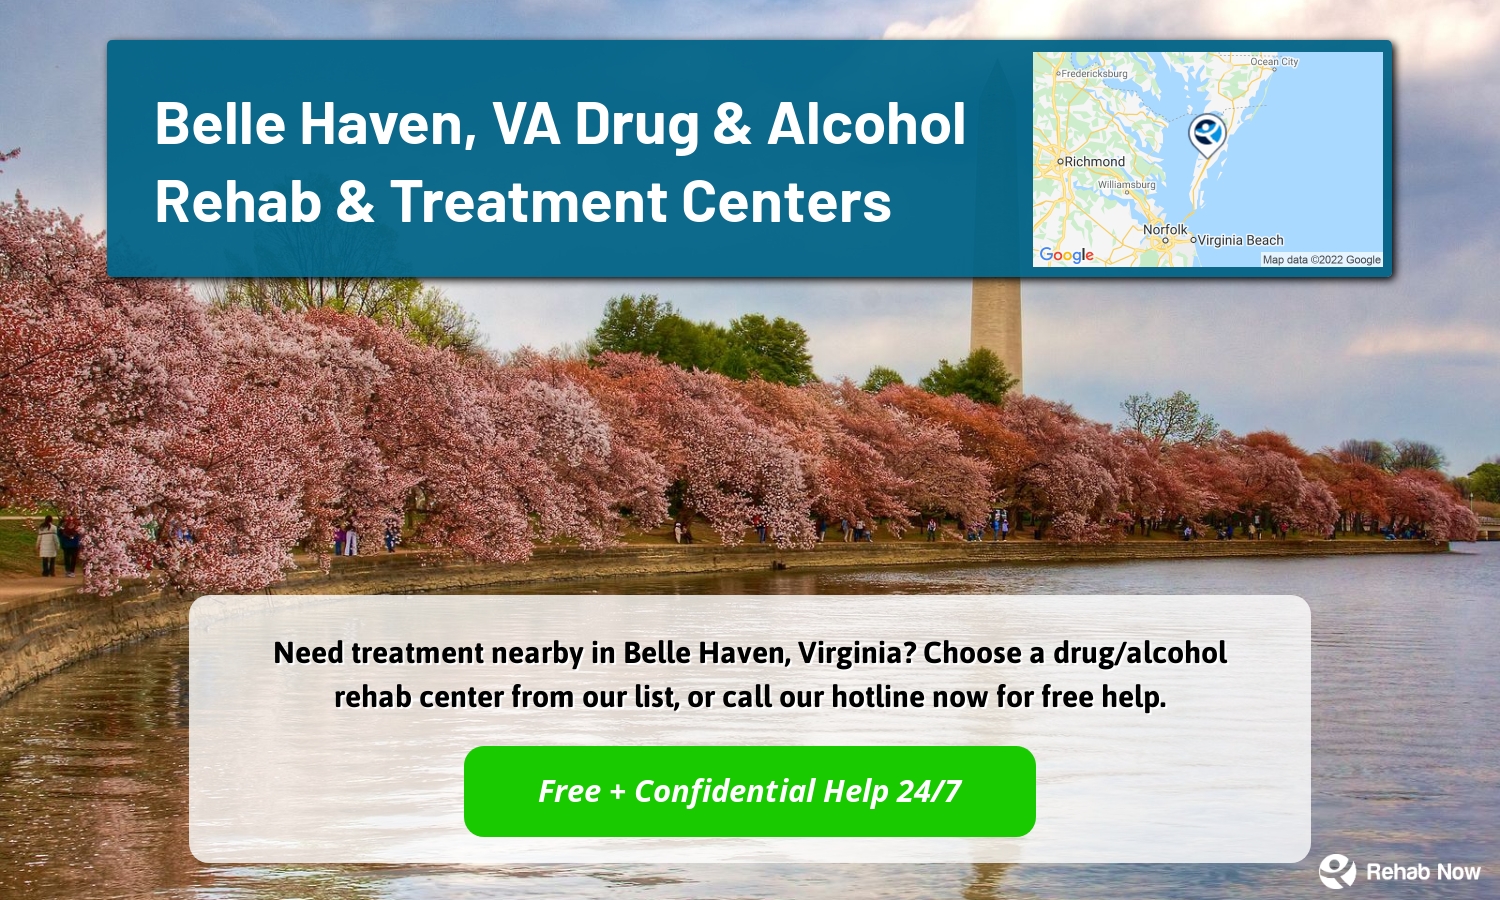 Need treatment nearby in Belle Haven, Virginia? Choose a drug/alcohol rehab center from our list, or call our hotline now for free help.